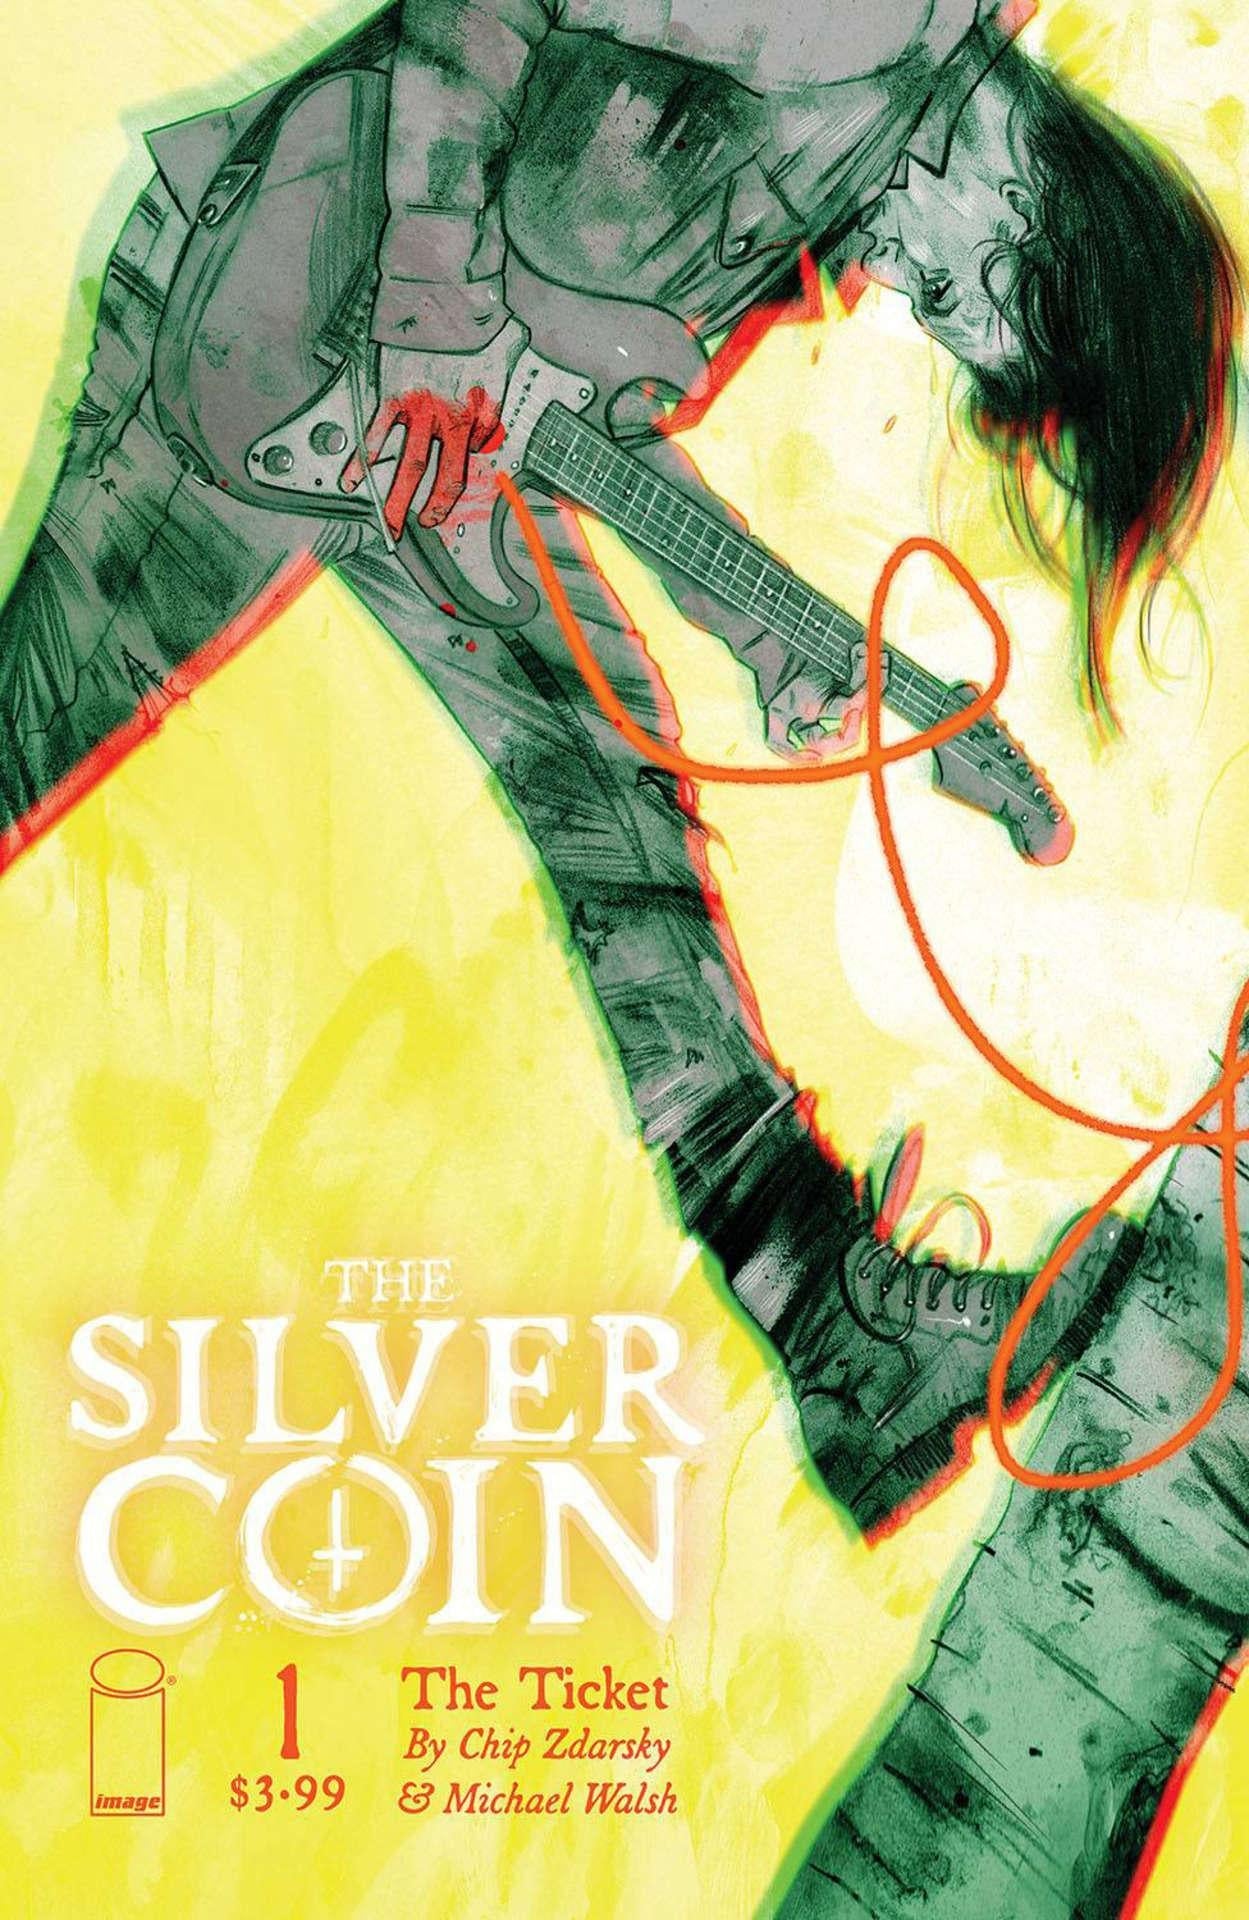 THE SILVER COIN #1 - The Comic Construct